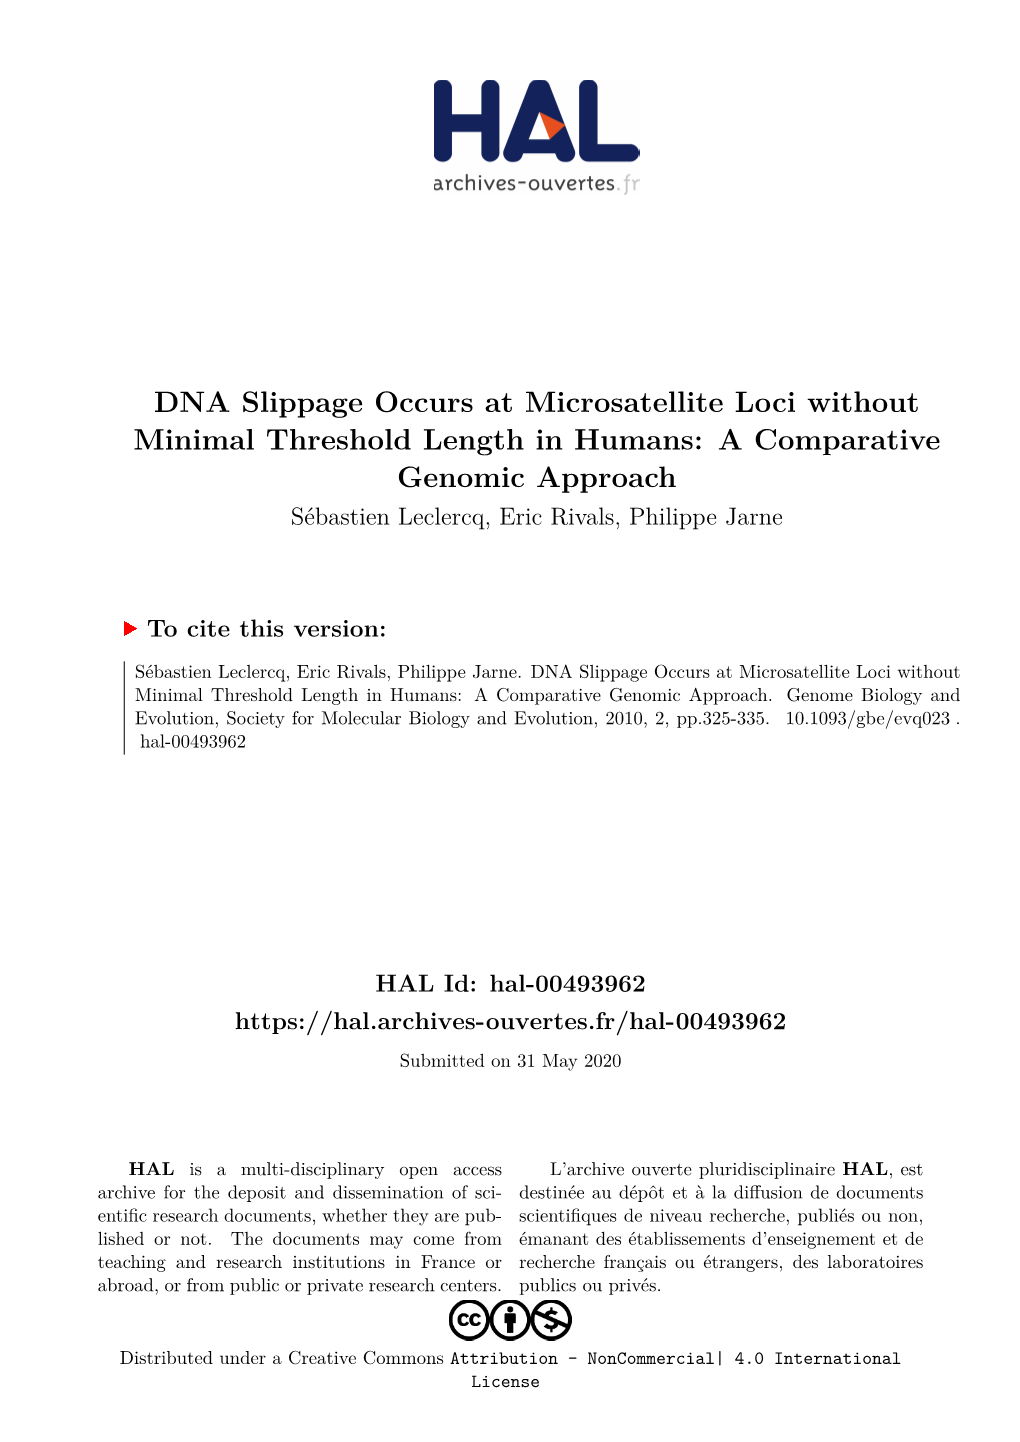 DNA Slippage Occurs at Microsatellite Loci Without Minimal Threshold Length in Humans: a Comparative Genomic Approach Sébastien Leclercq, Eric Rivals, Philippe Jarne